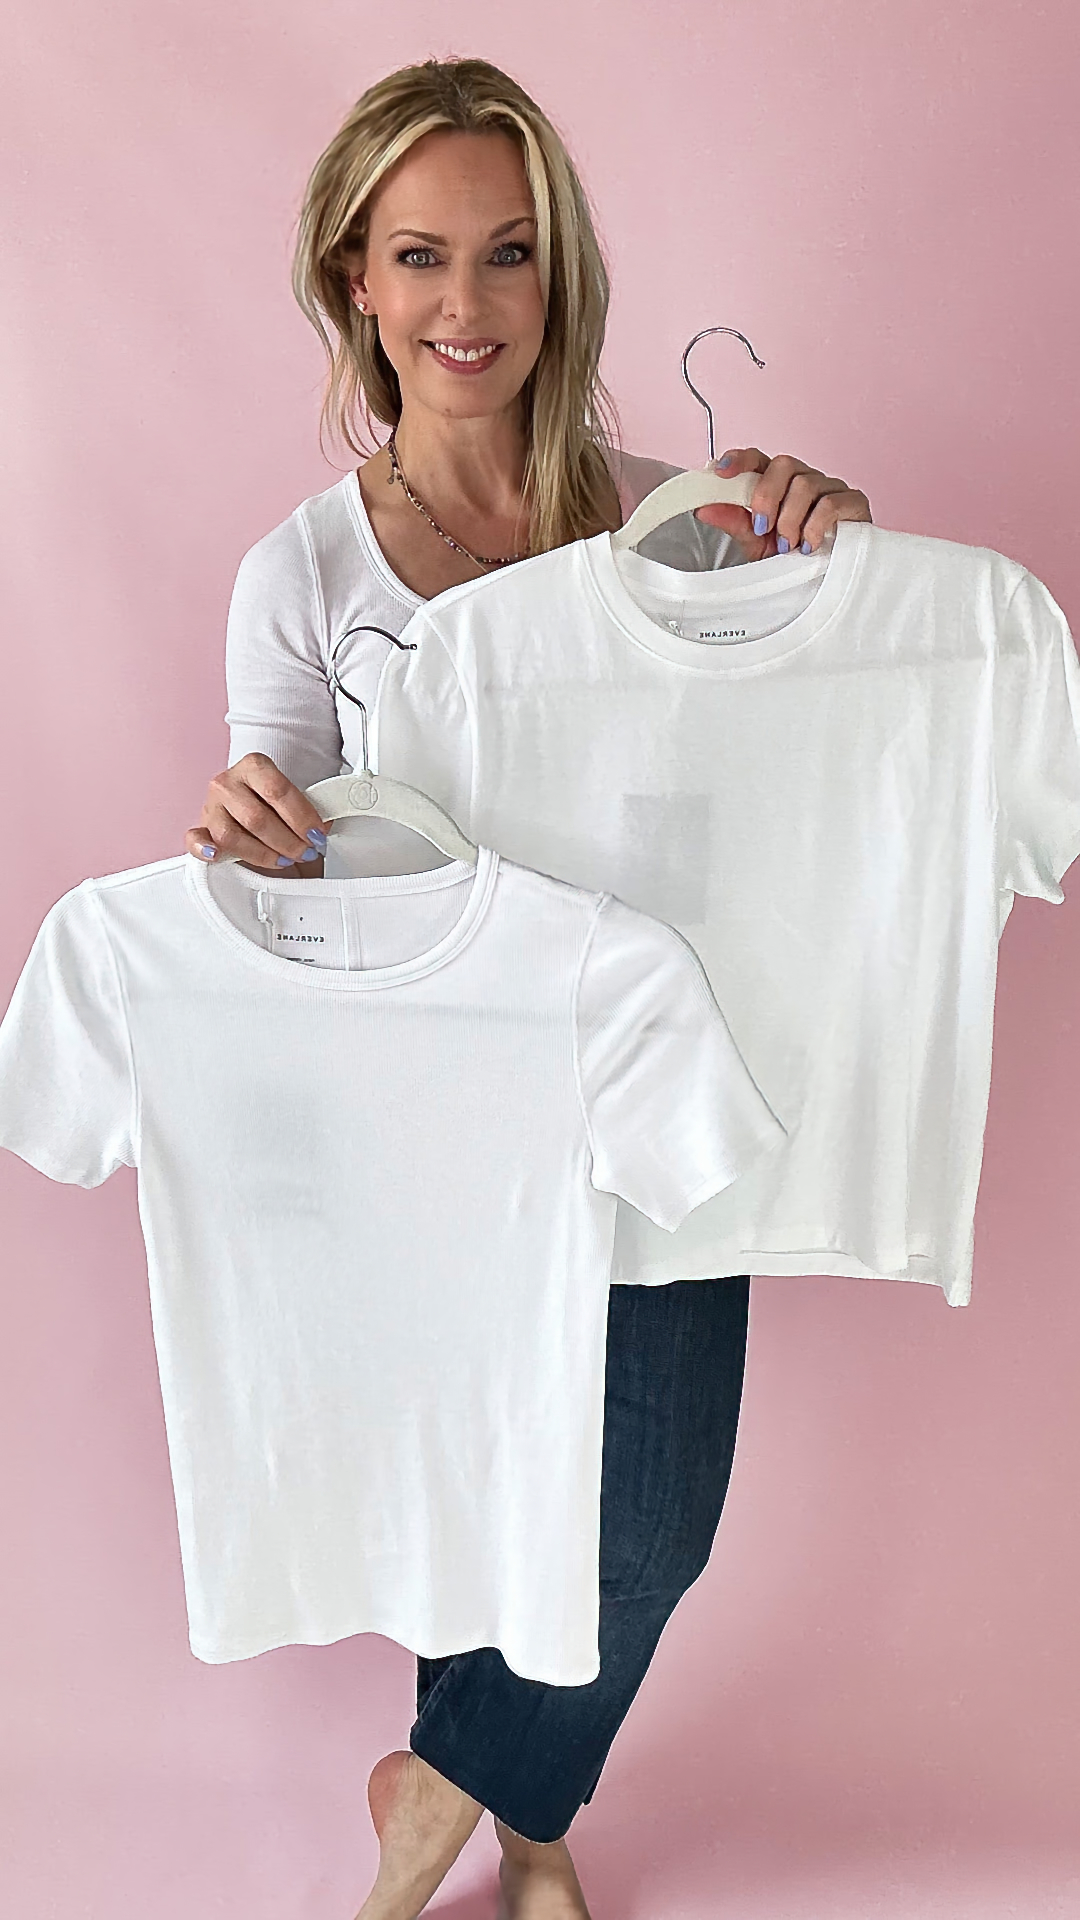 3 Classic White T-Shirts From Everlane That Aren't See-Through